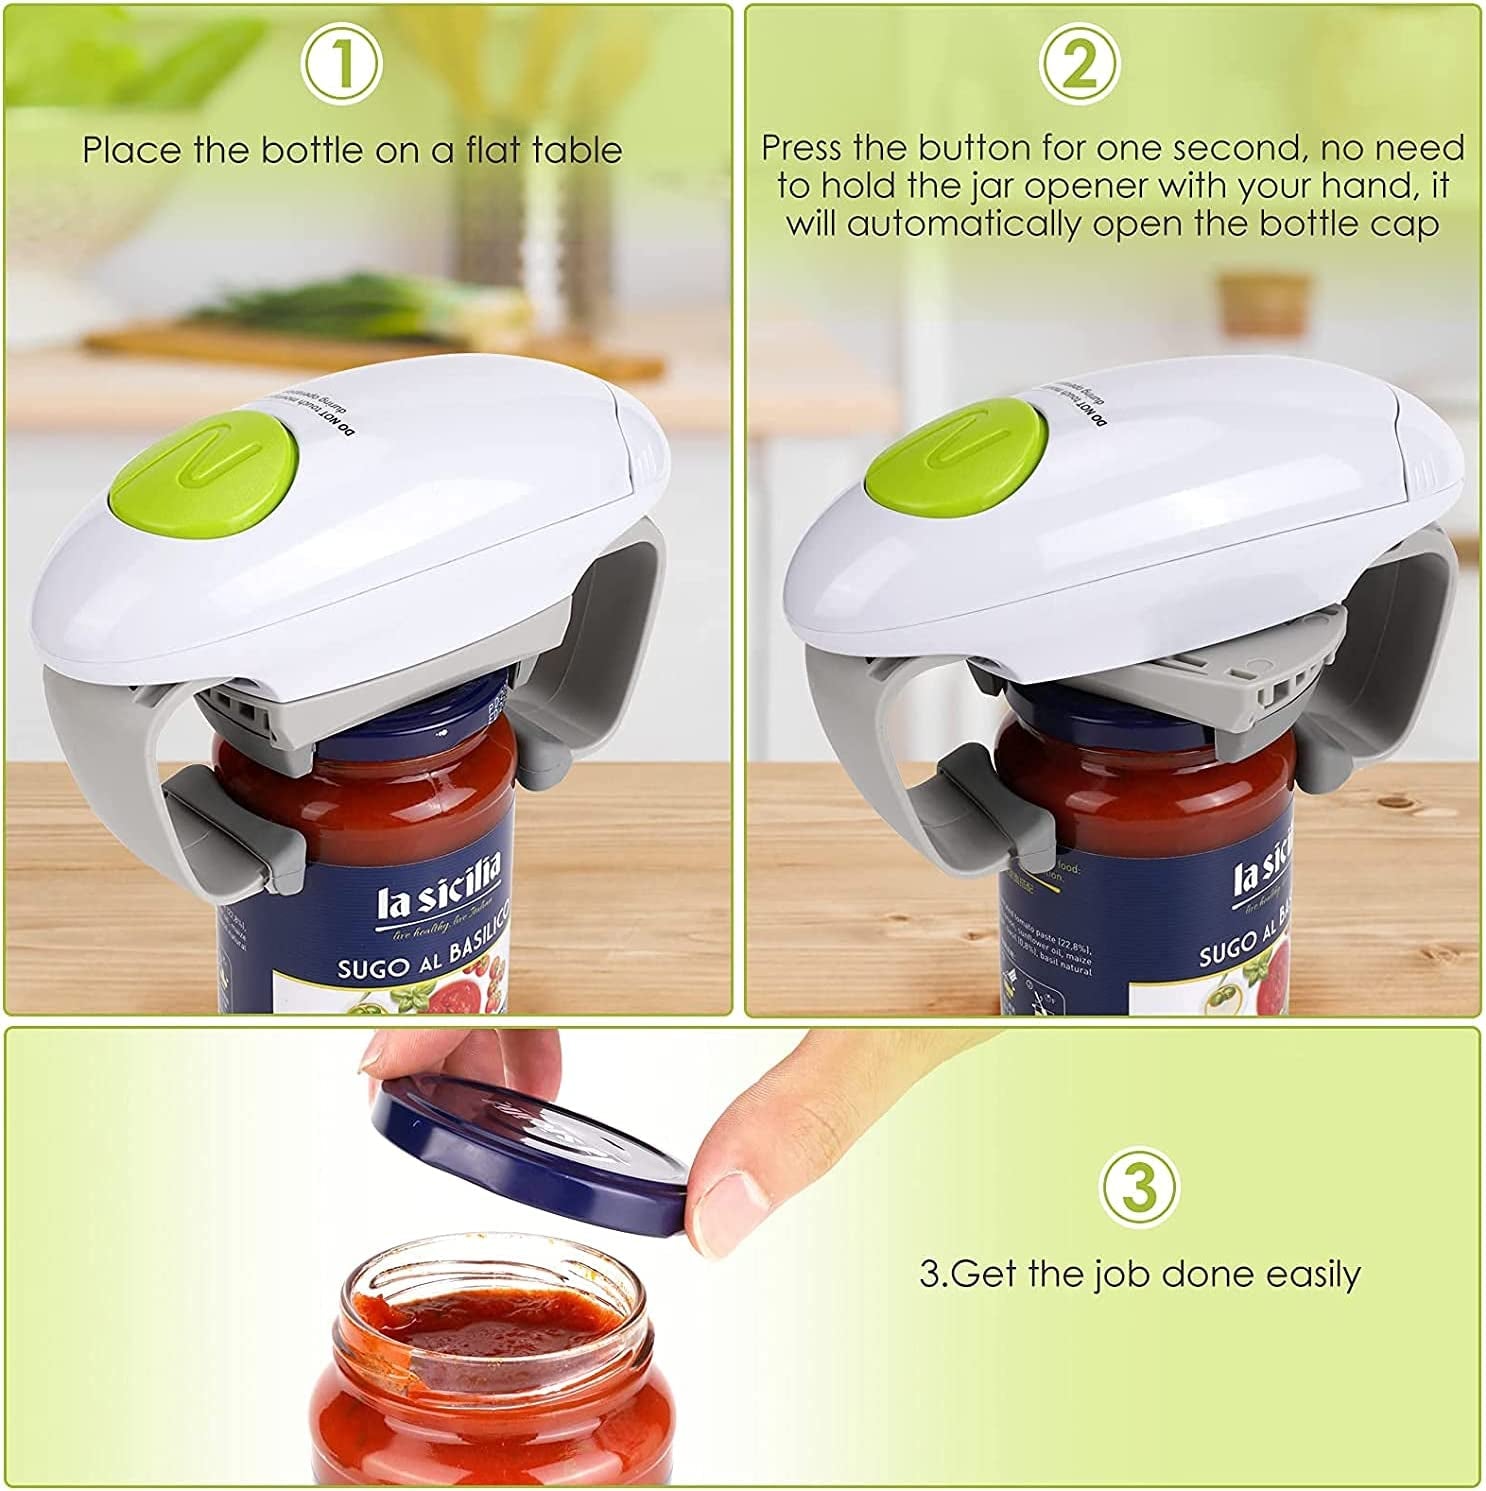 Electric Jar Opener, Strong Tough Automatic Jar Opener for New Sealed Jars,The  Hands Free Jar Opener for Weak Hands,Chef's and Seniors with Arthritis 